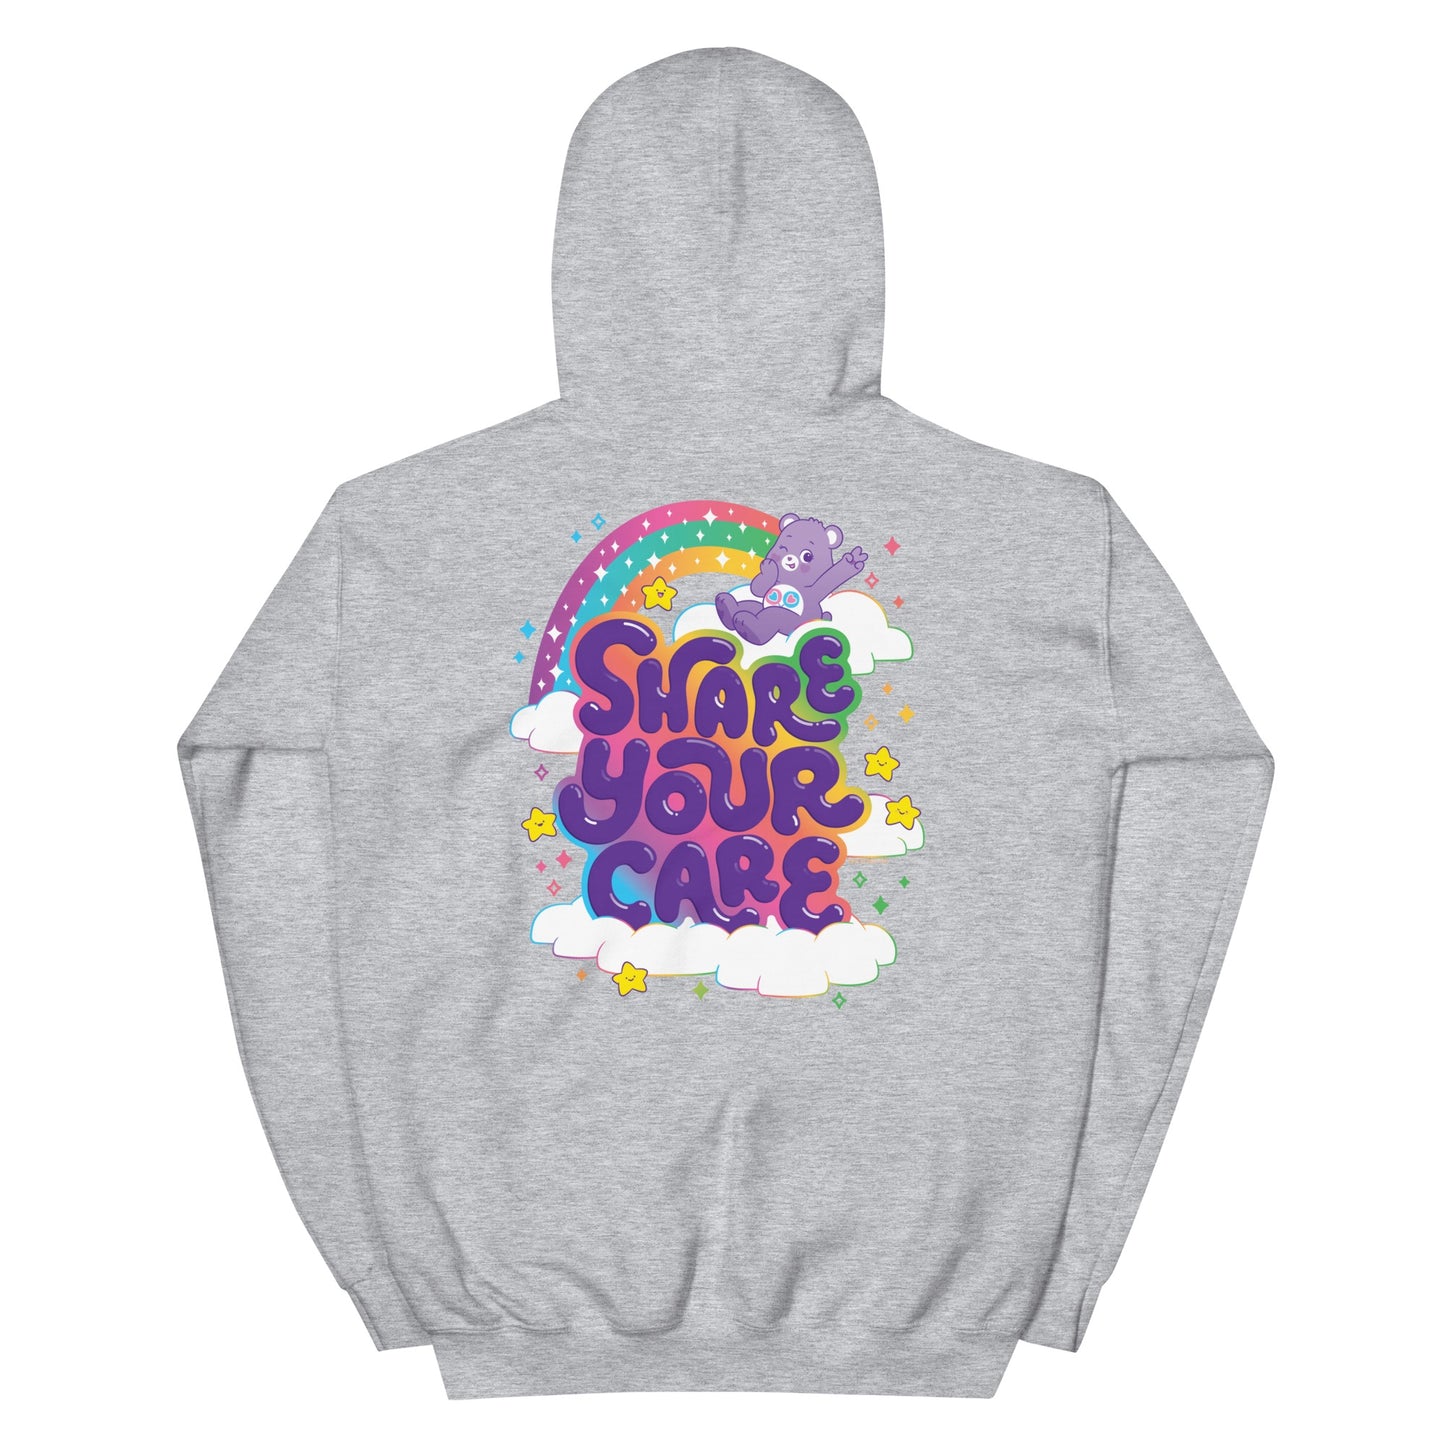 Care Bears Share Your Care Adult Hoodie